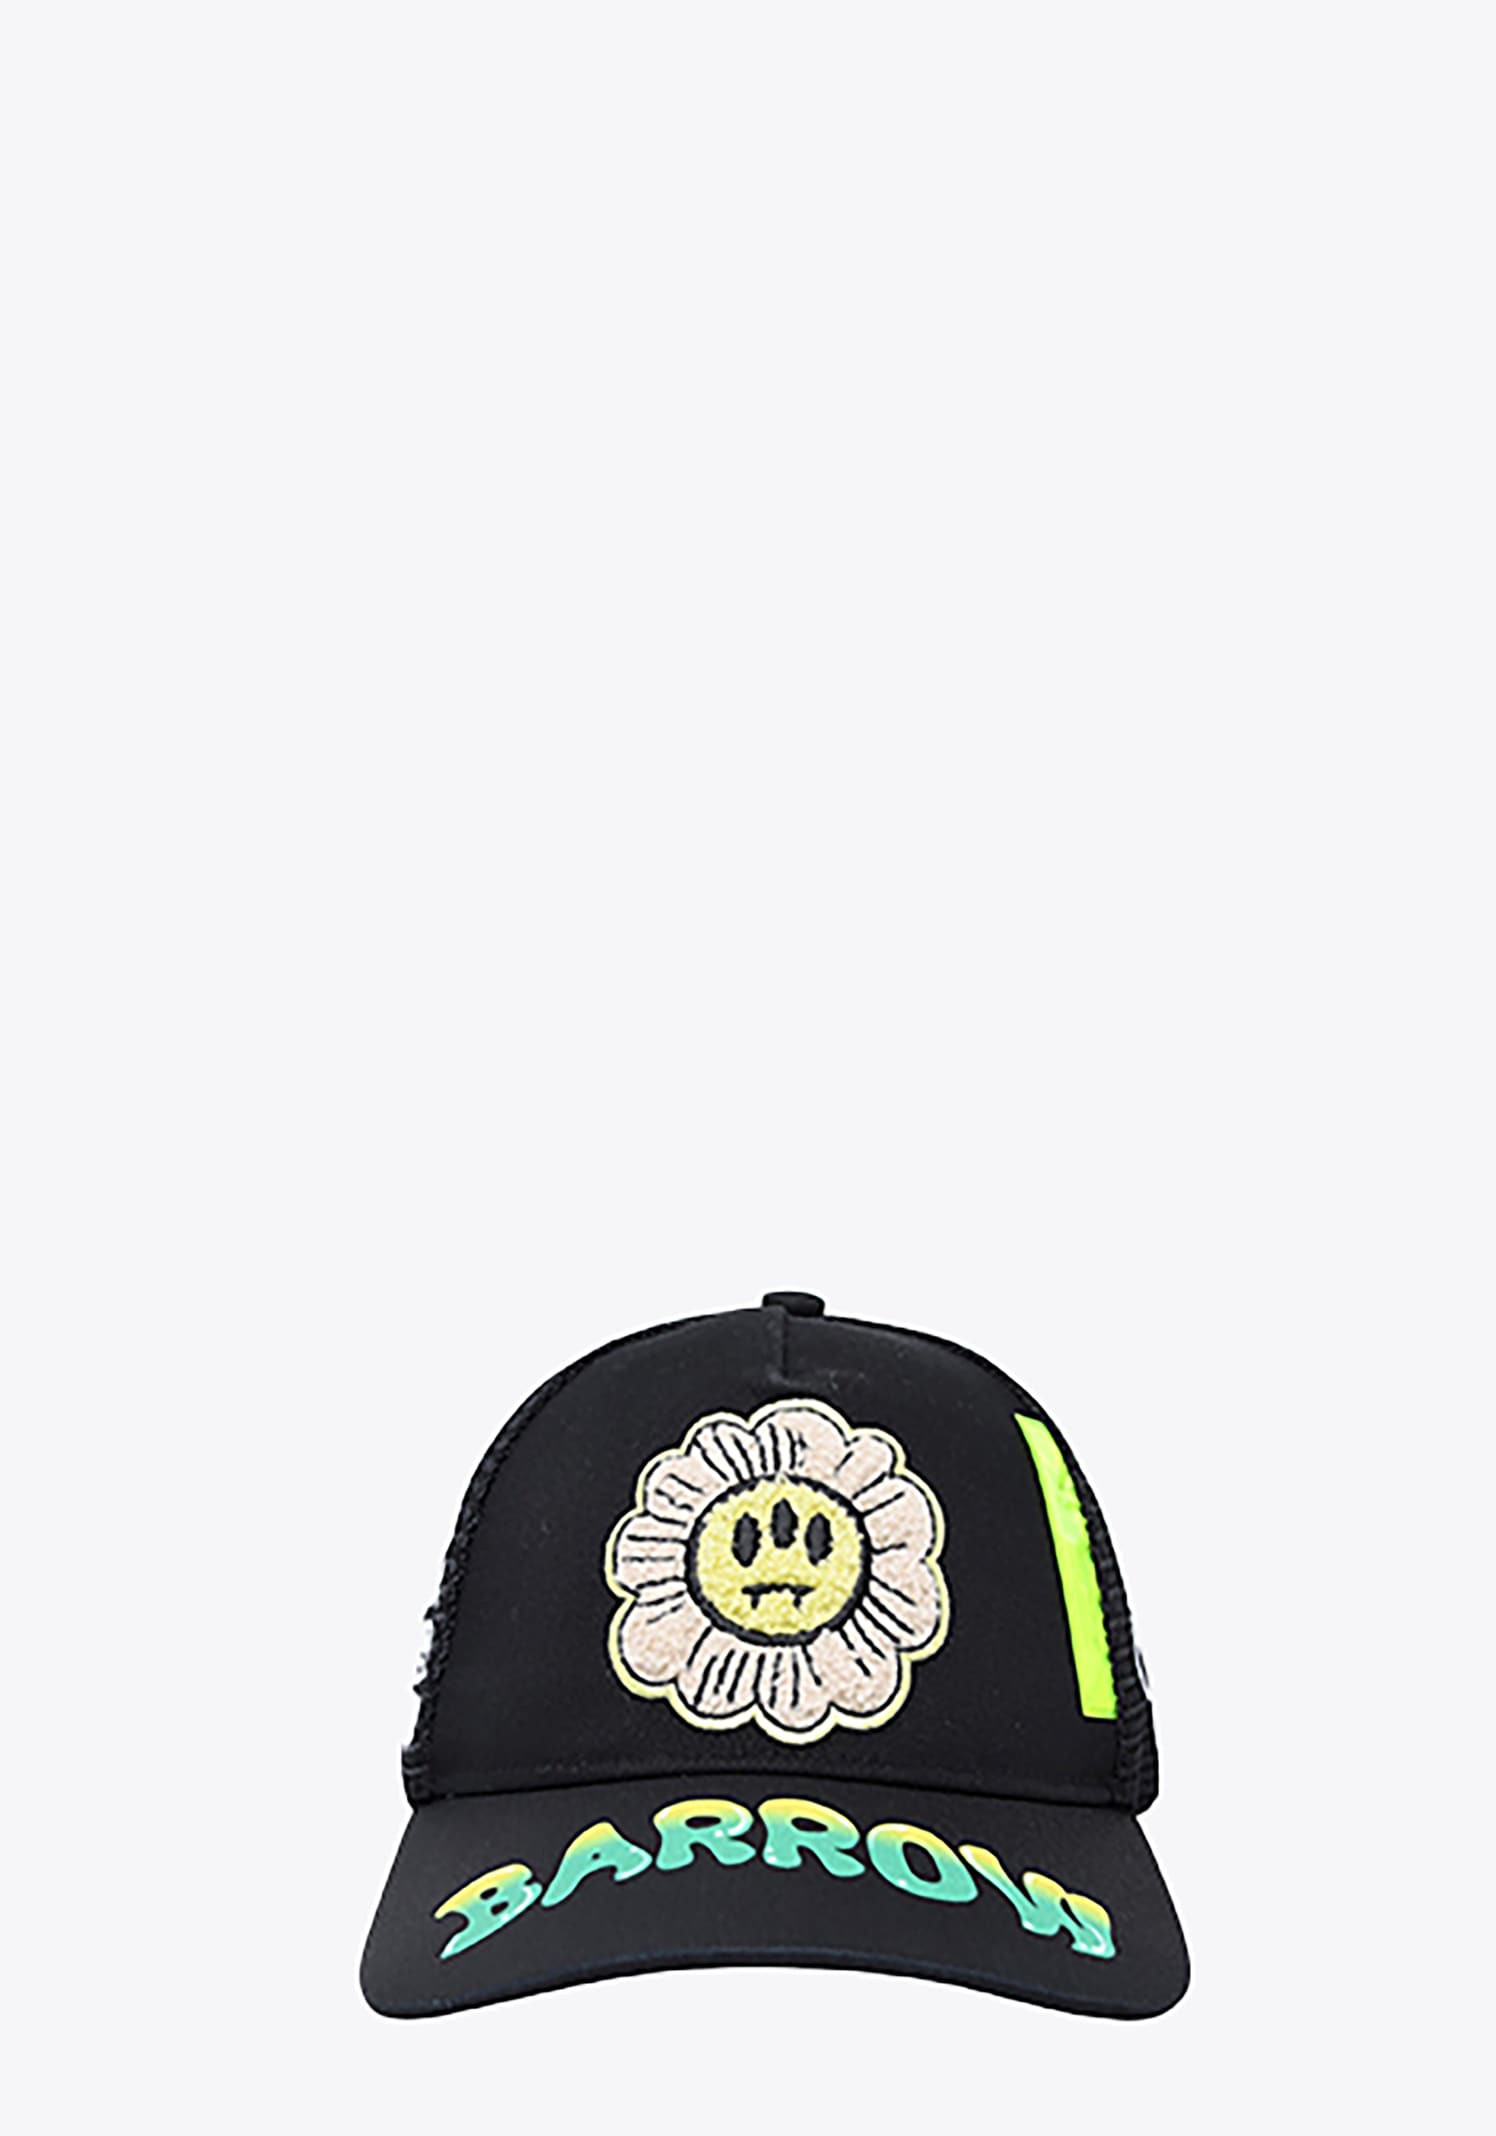 Barrow Tracker Black cotton tracker cap with flower and patches detail